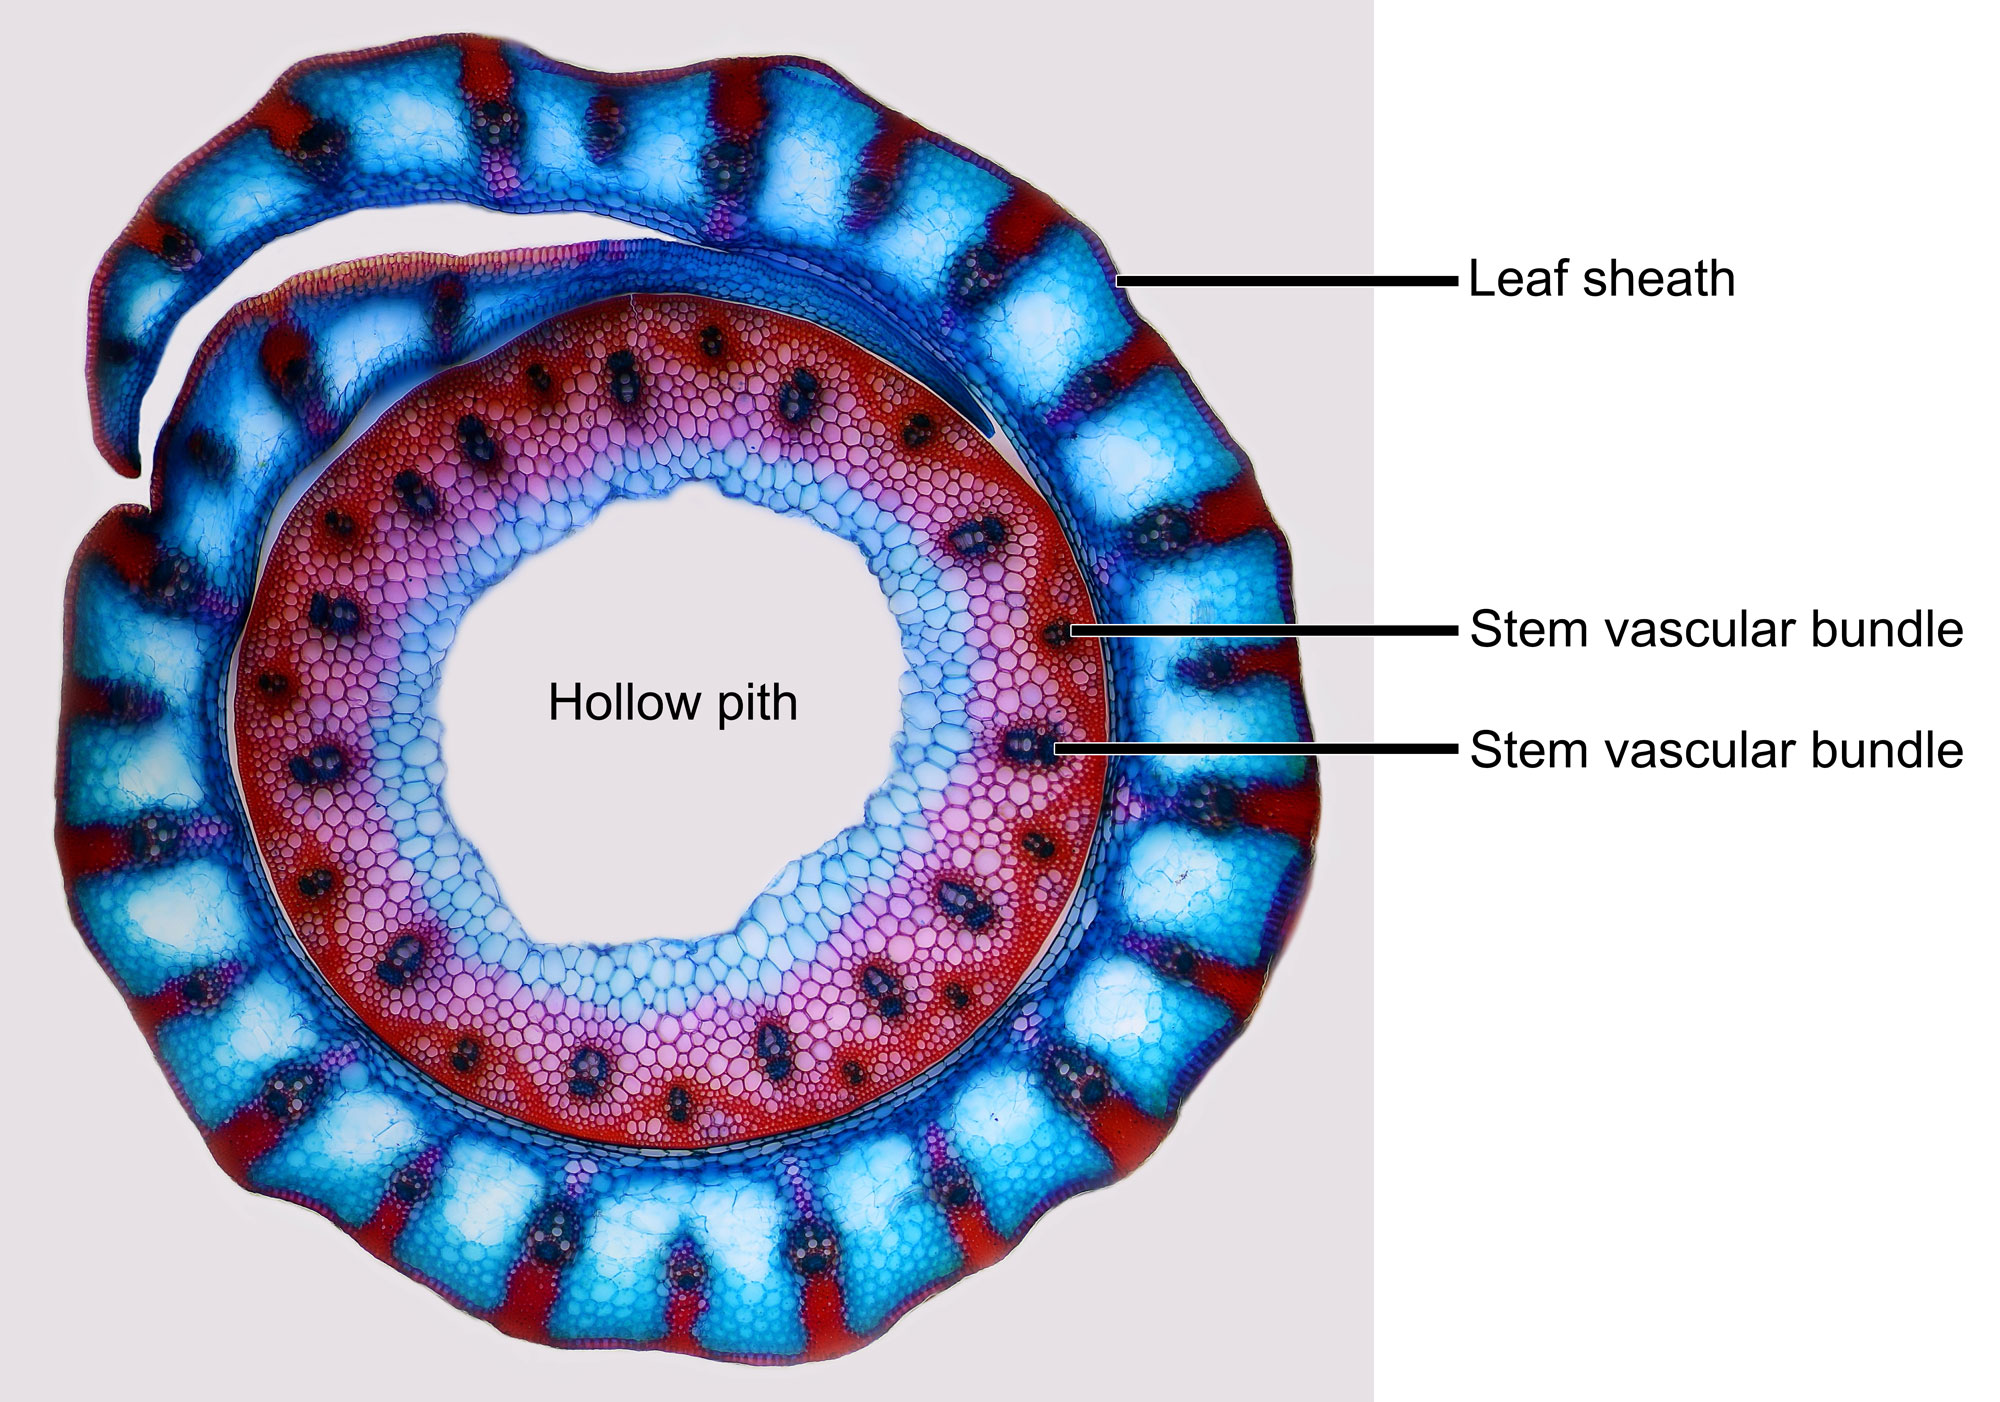 Photograph of a stained cross section of a rye stem surrounded by a leaf sheath taken under a microscope. The photo shows a stem with a hollow pith surrounded by two rings of vascular bundles (inner ring of larger bundles and outer ring of smaller bundles). The leaf sheath has a single line of bundles, each with extensions connecting the bundle to the upper and lower epidermis of the leaf.